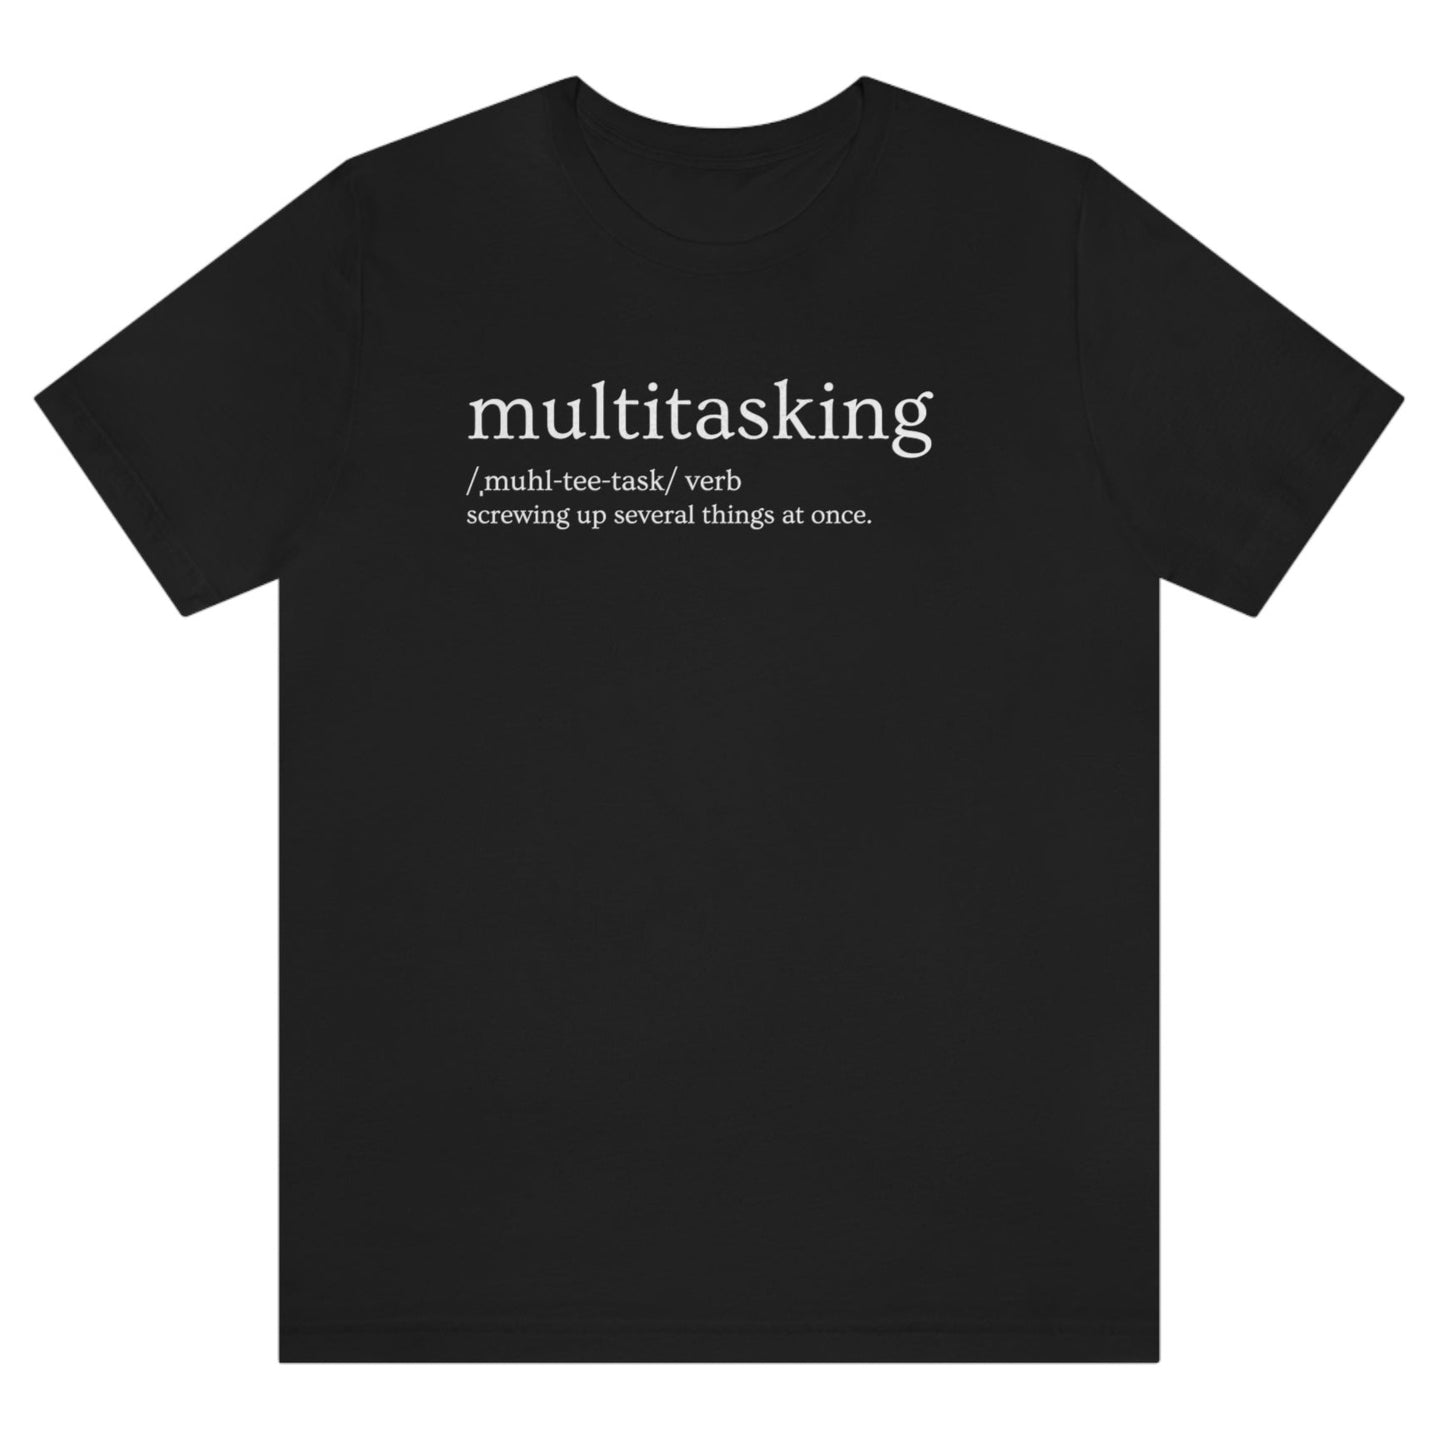 multitasking-screwing-up-several-things-at-once-black-t-shirt